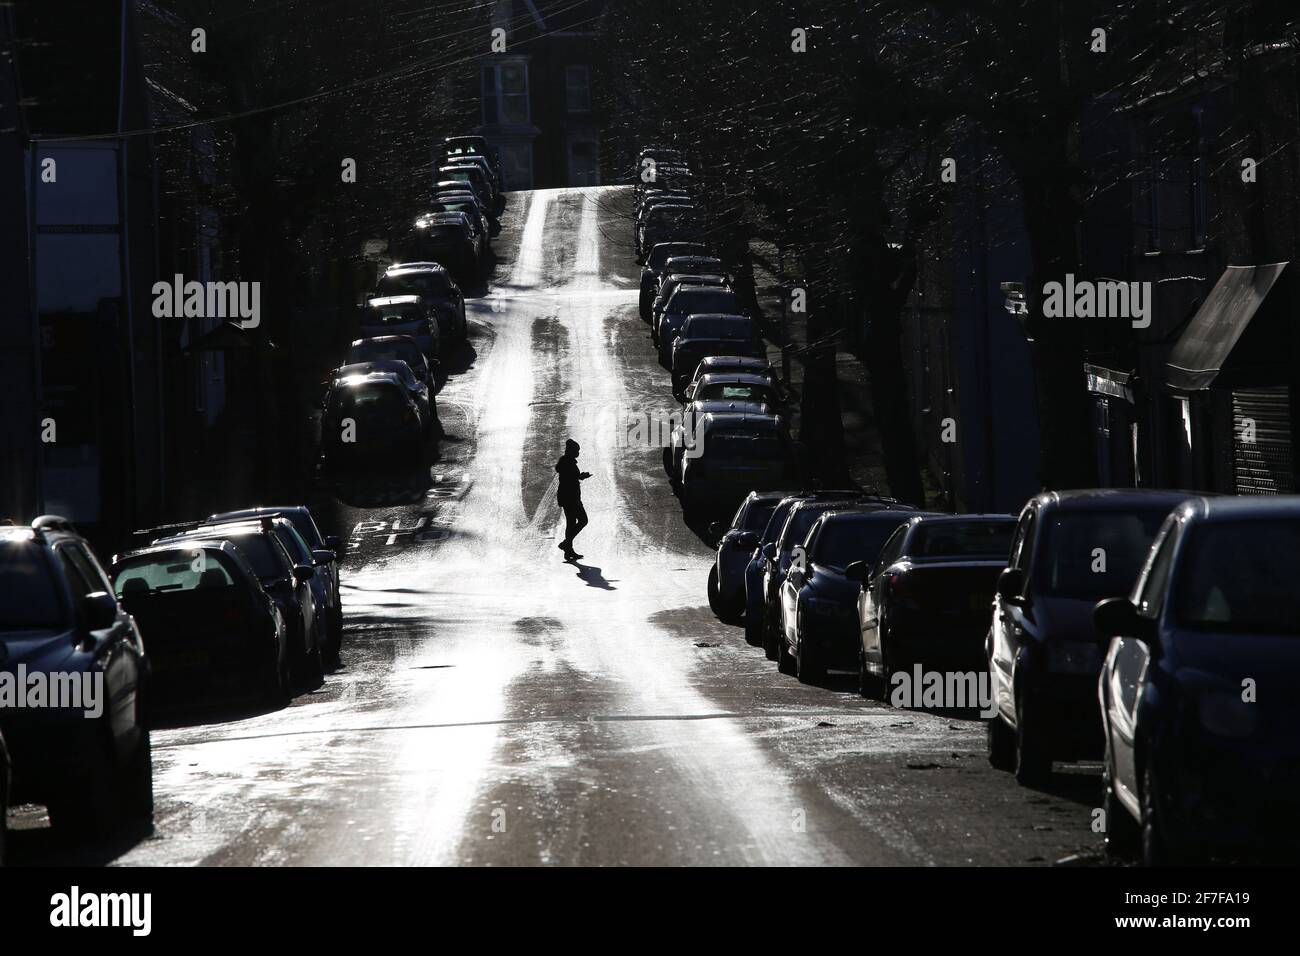 Swansea, Wales, UK - December 6, 2020, city street full of parked cars with pedestrian walking across the road, high contrast Stock Photo